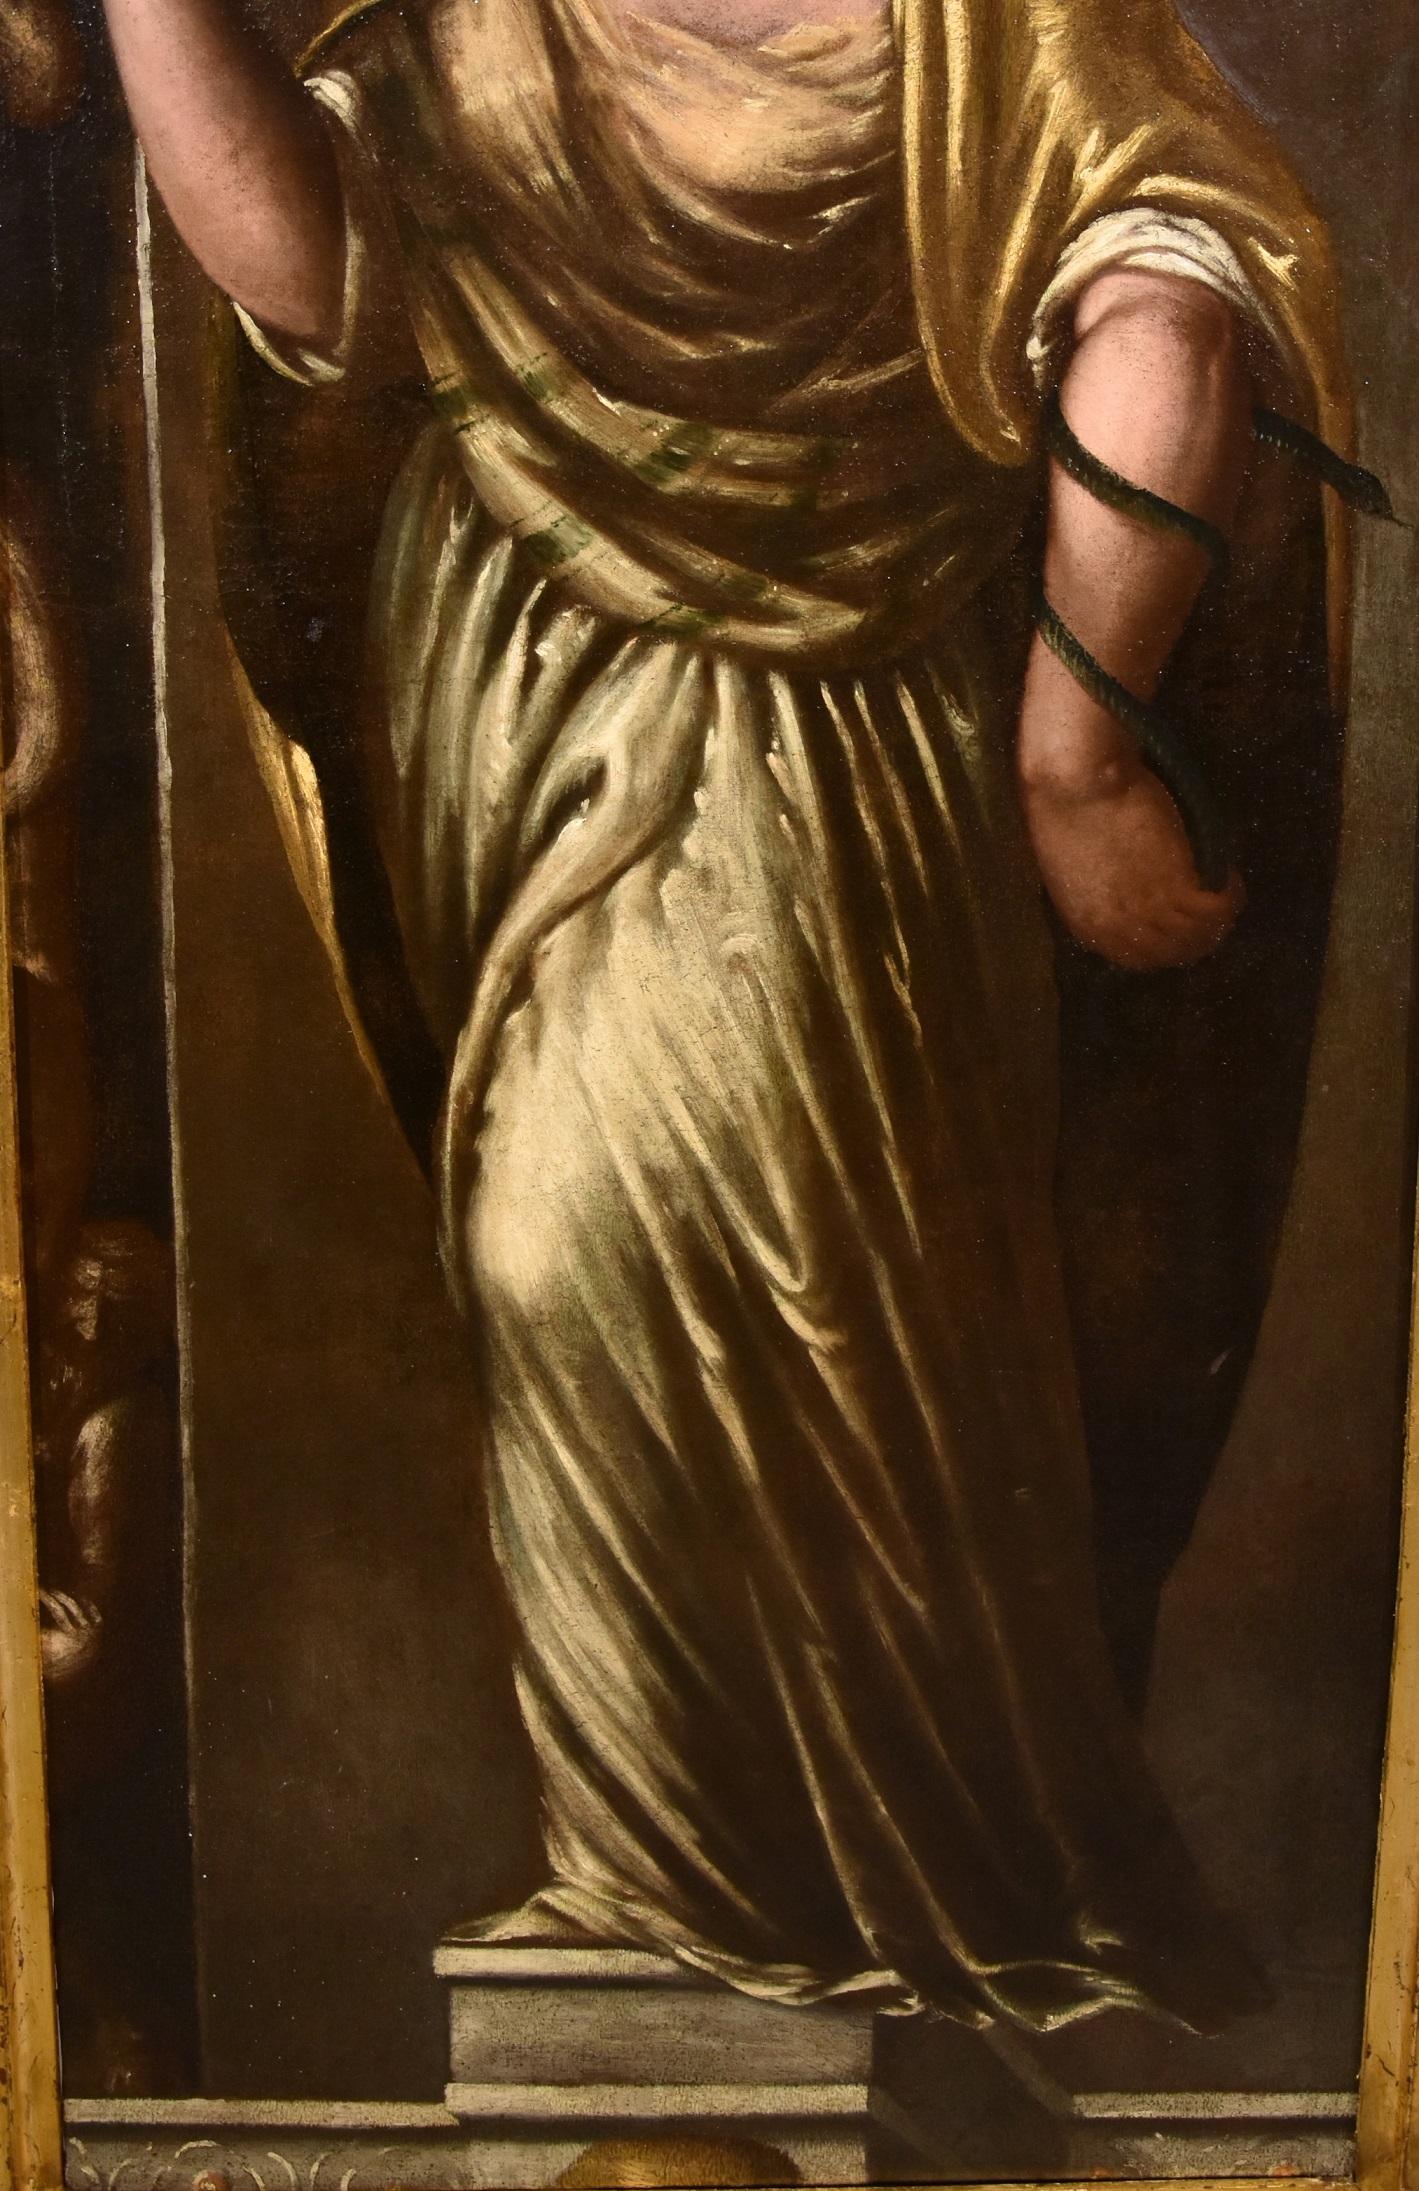 Allegory Wisdom Stella Paint Oil on canvas Old master 16/17th Century Italy Art - Brown Portrait Painting by Giacomo Stella (Brescia 1545 - Rome 1630)